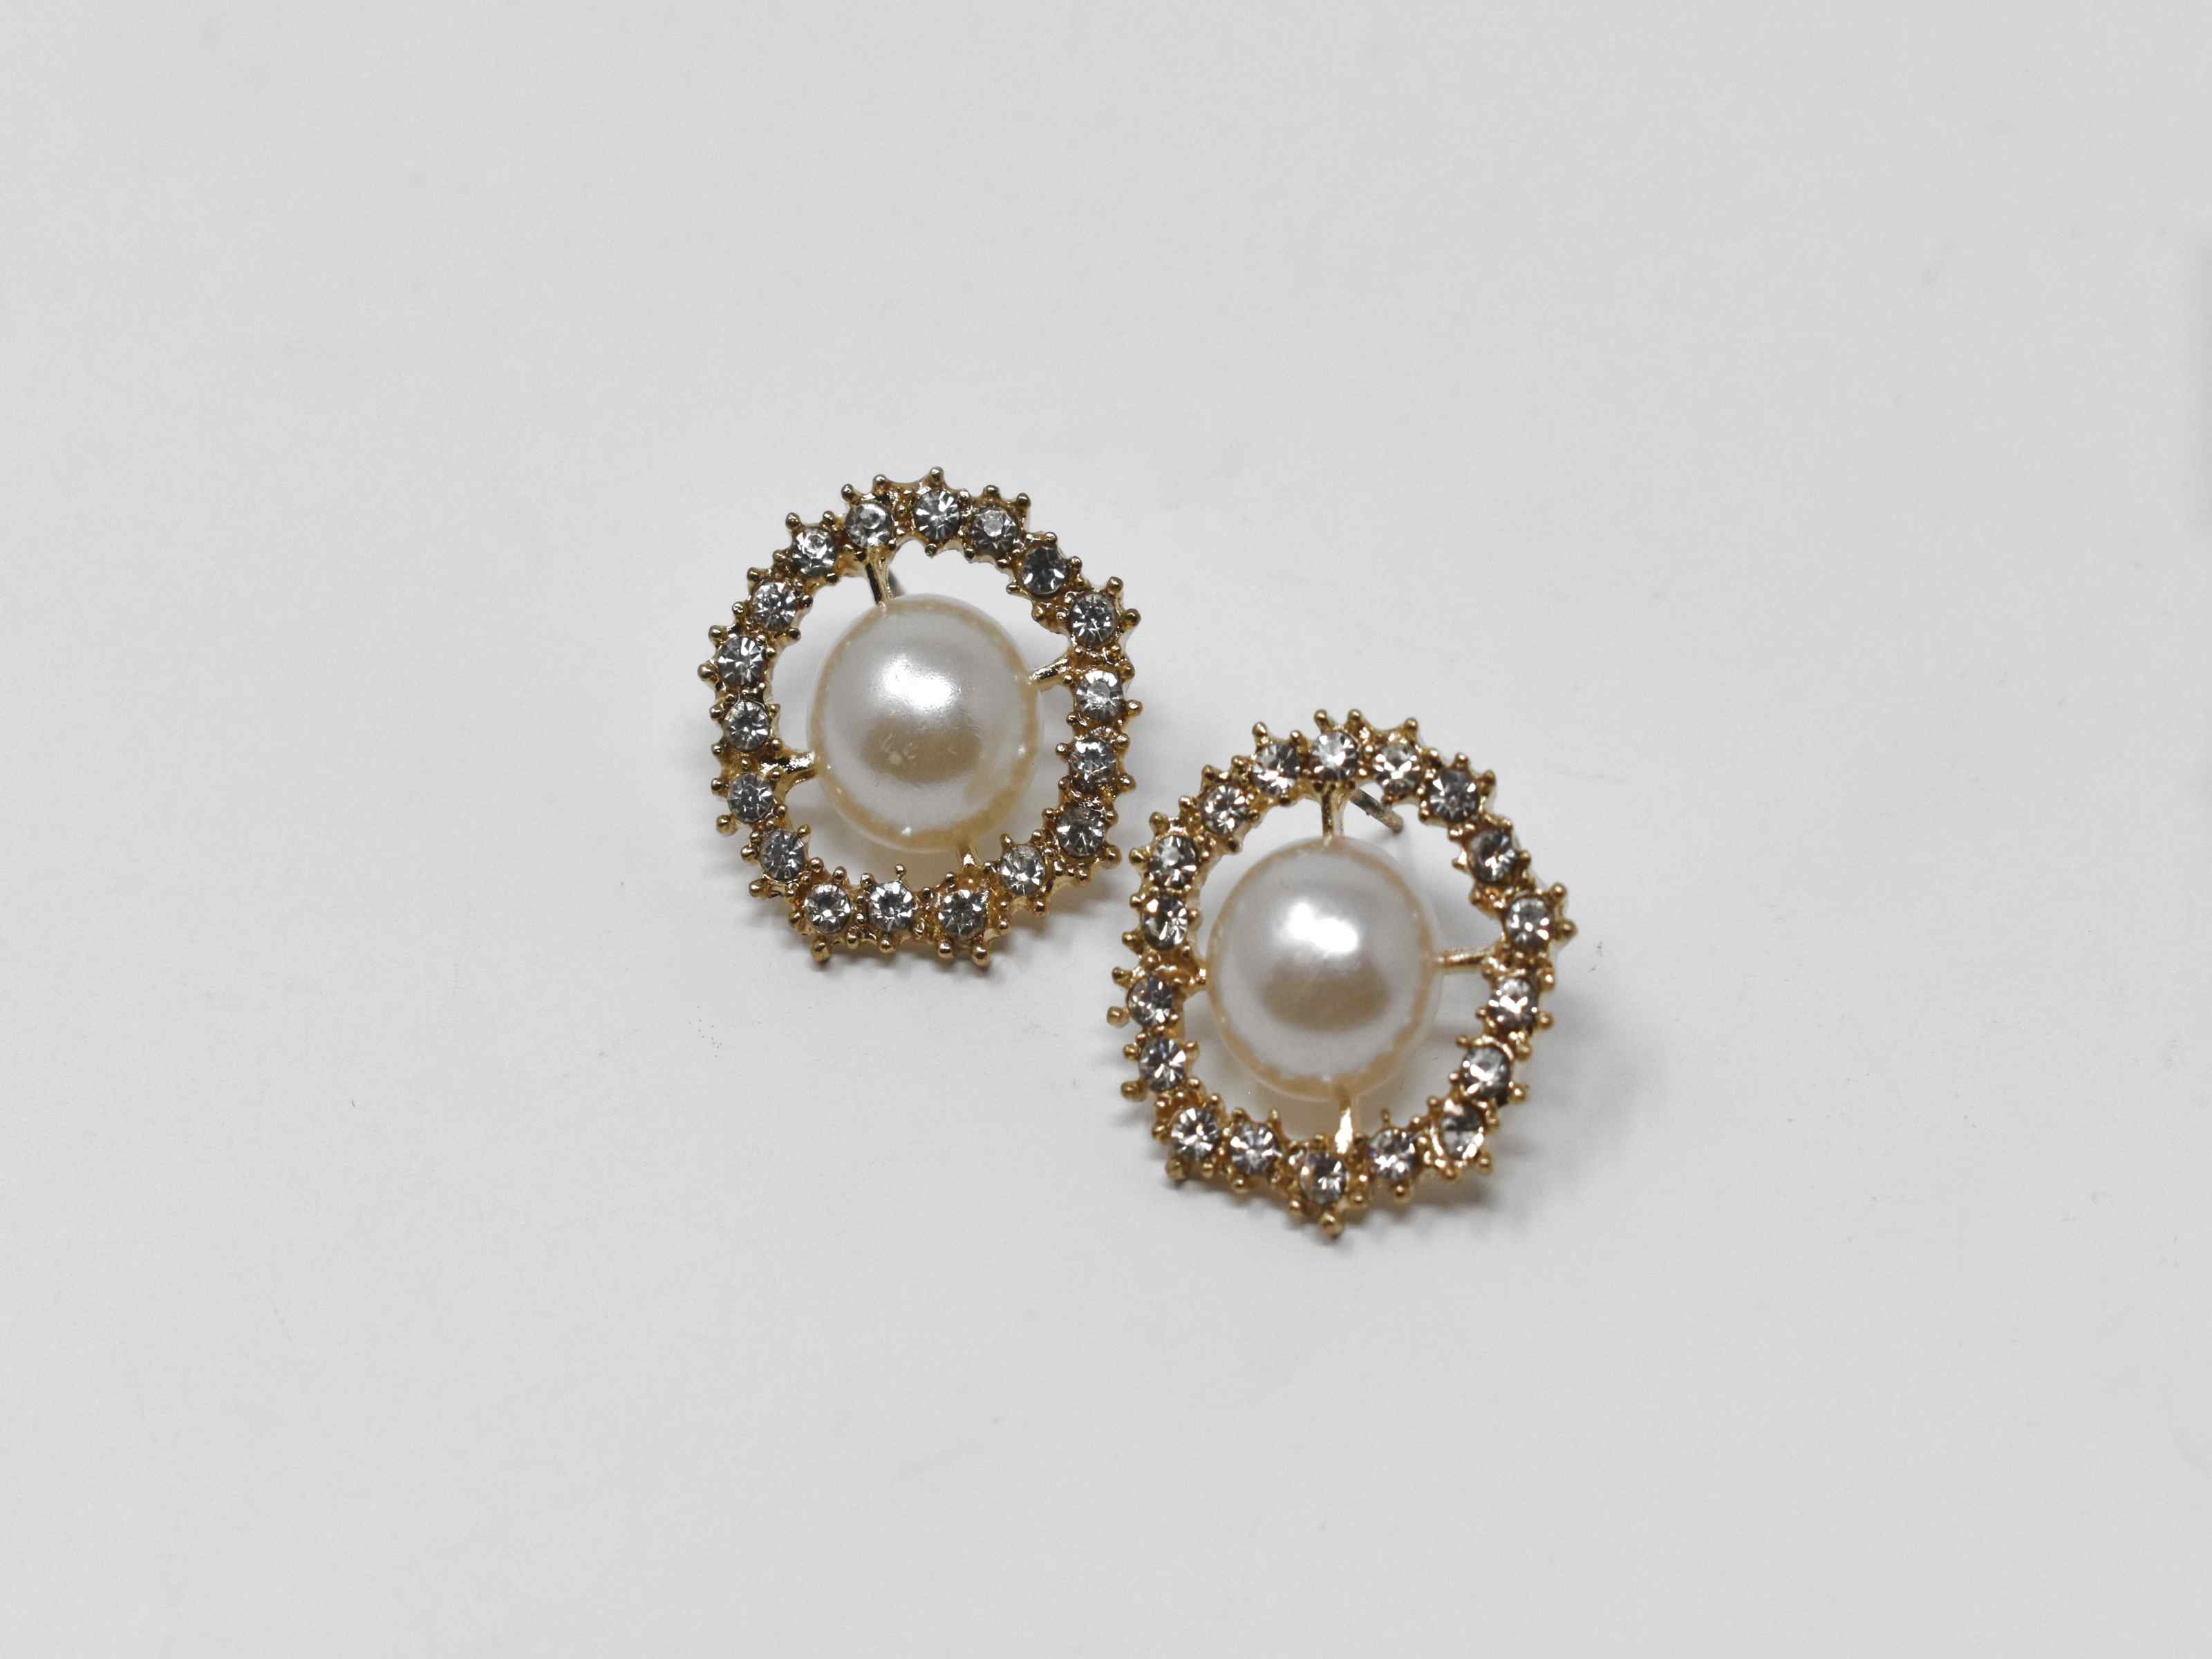 Our dietes earrings are a must have staple with a burst of sparkle. These earrings are a gold tone with a pearl core surrounded by a beautiful halo of stones. They are 3/4 inches in length with a push back clasp.